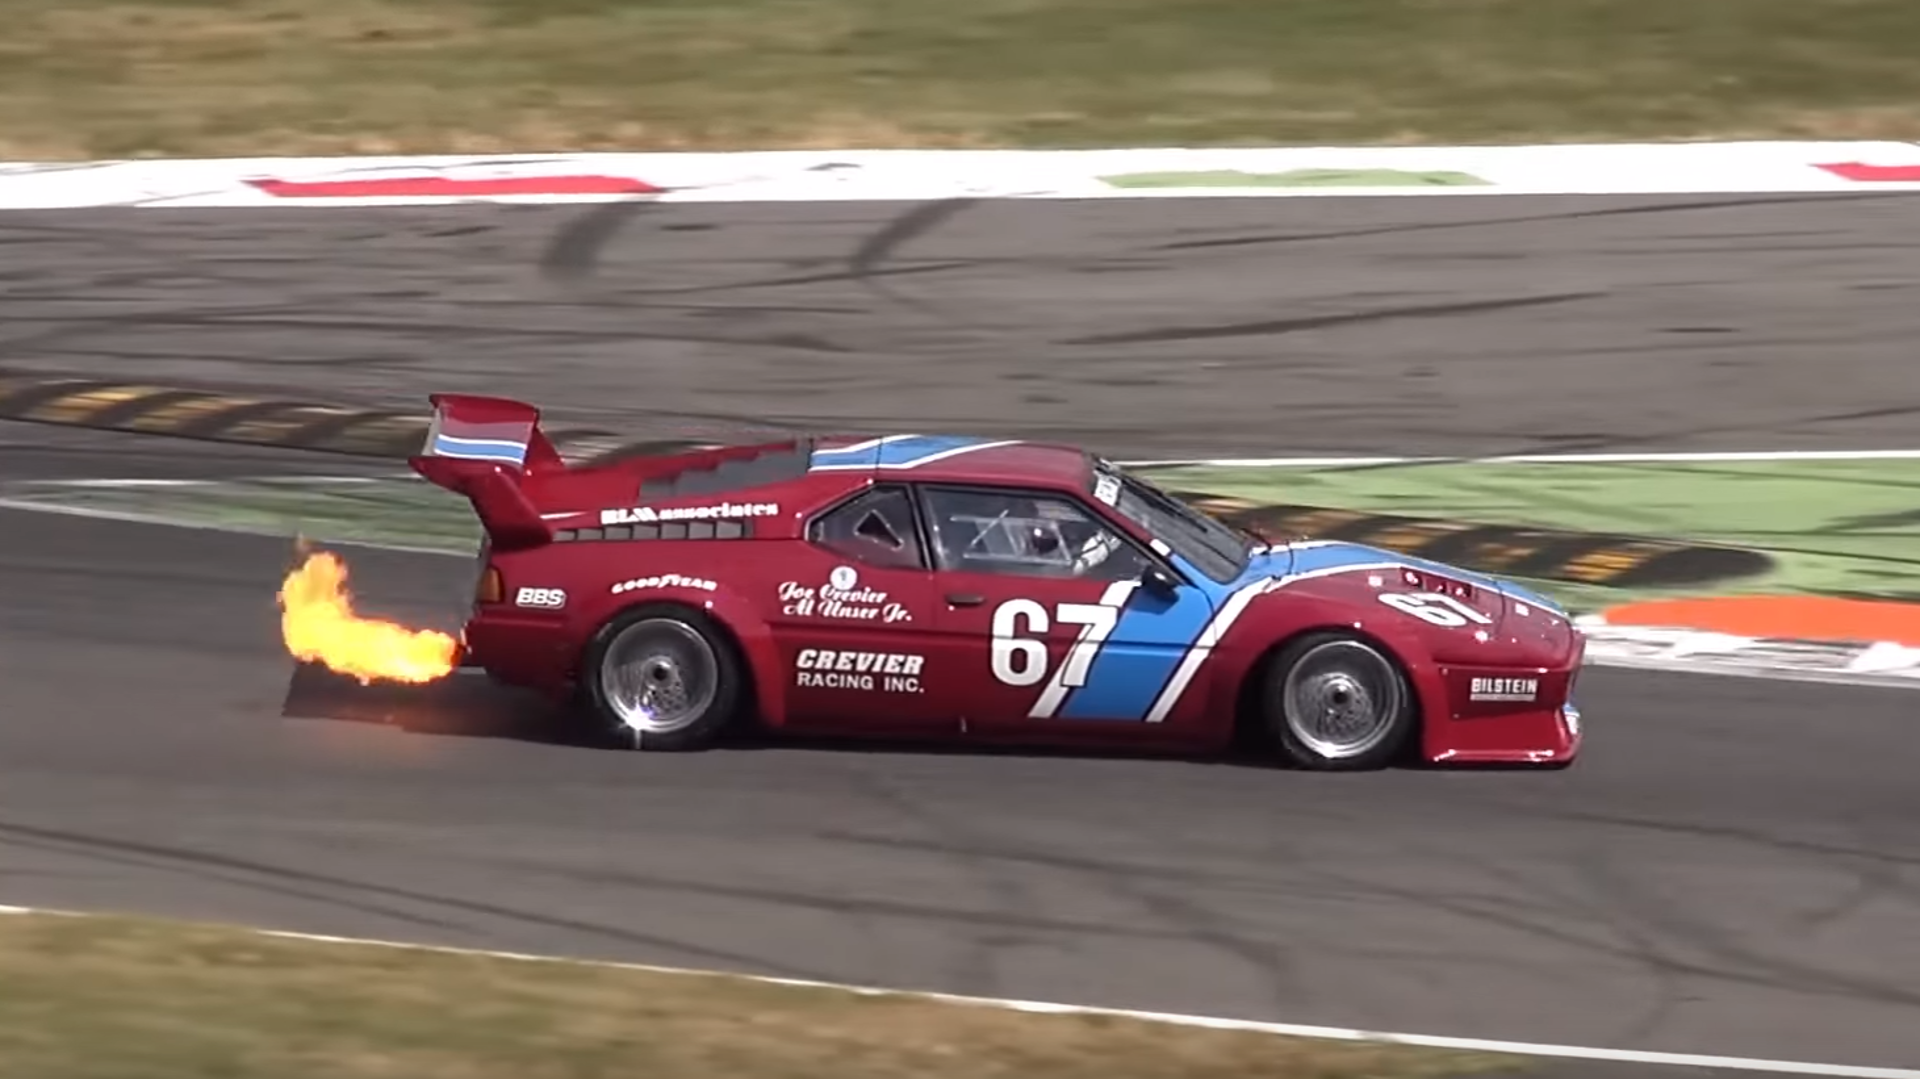 Watch The Flame-Spitting Dance of a 1979 BMW M1 ProCar at Spa